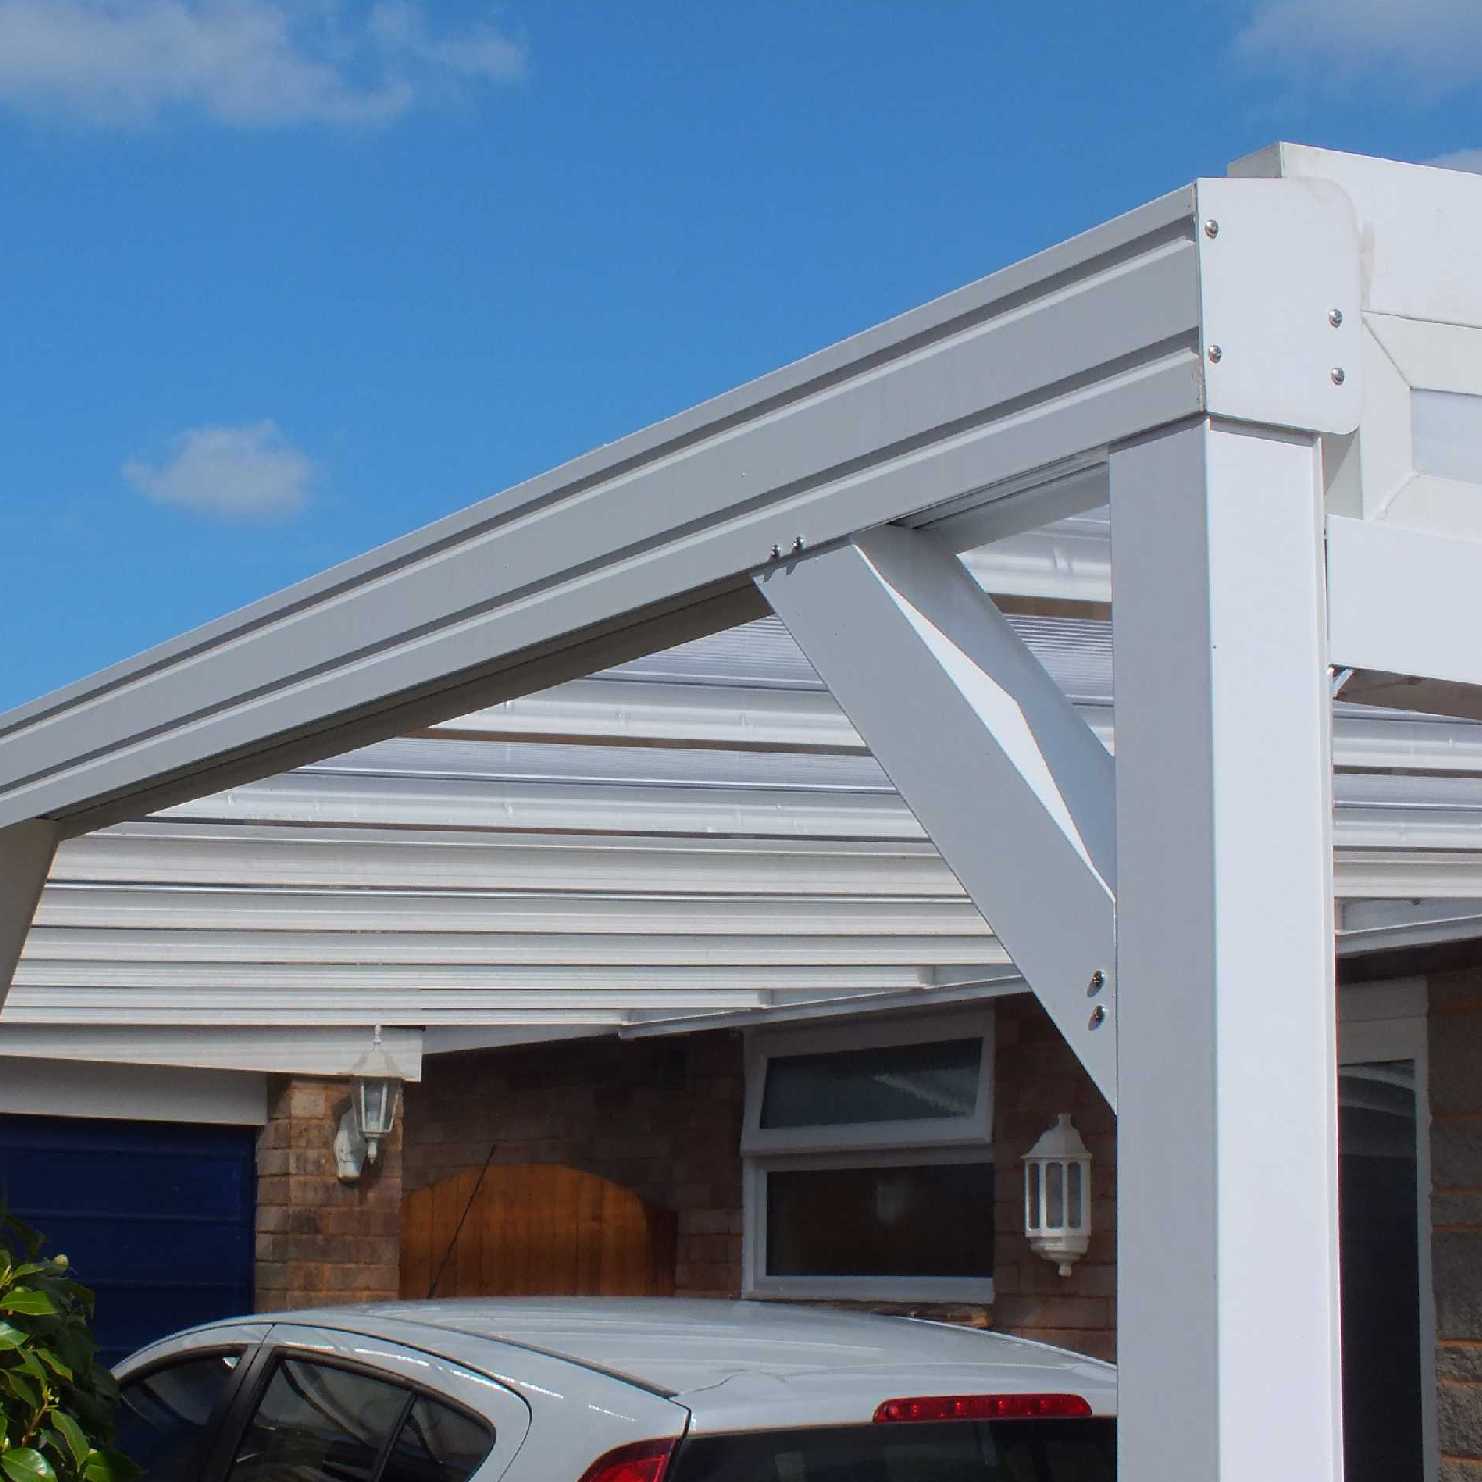 Buy Omega Smart Lean-To Canopy, White with 16mm Polycarbonate Glazing - 11.6m (W) x 1.5m (P), (5) Supporting Posts online today